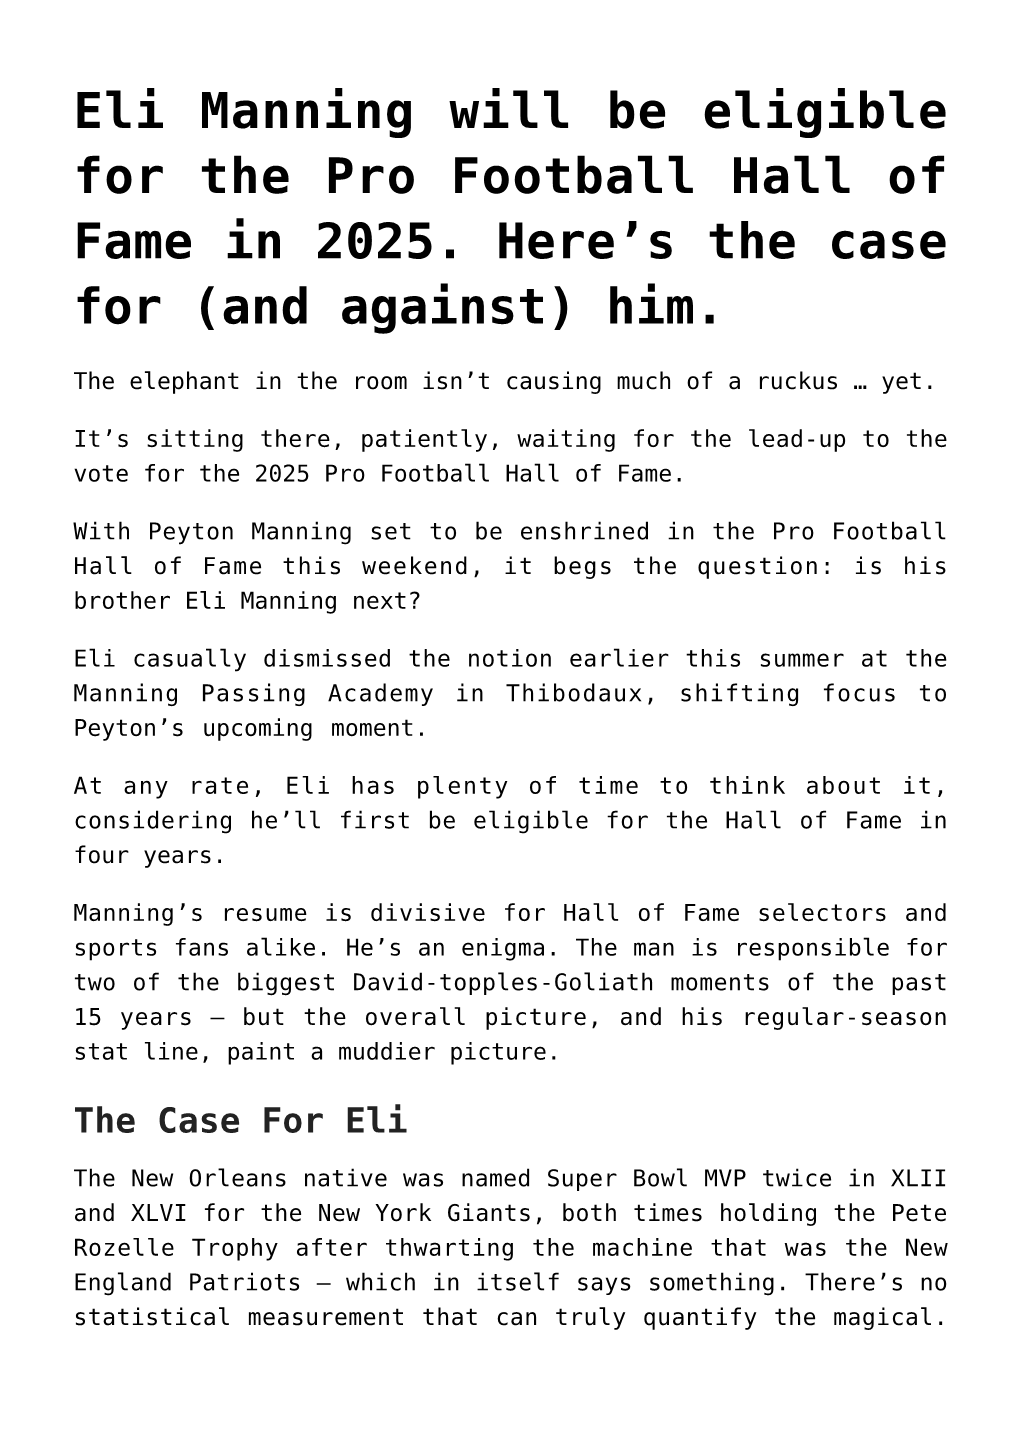 Eli Manning Will Be Eligible for the Pro Football Hall of Fame in 2025